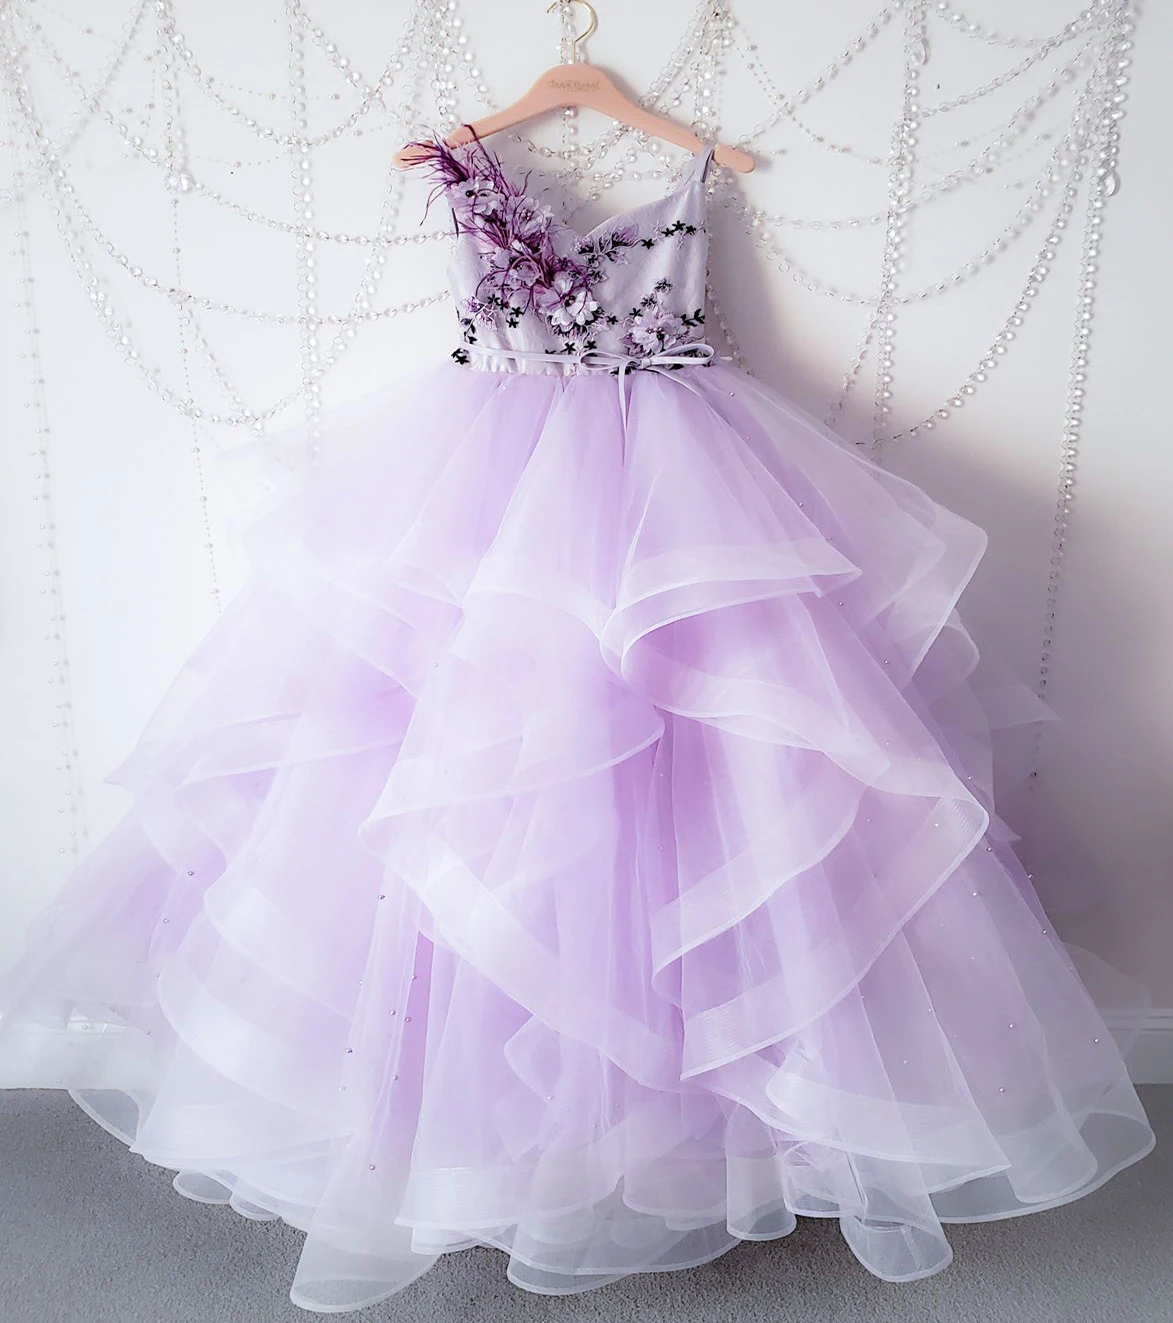 

Lavender Tulle 3D Beaded Lace Wedding Flower Girl Dress Kids Party Dress Princess Birthday Gown Puffy Couture Dress